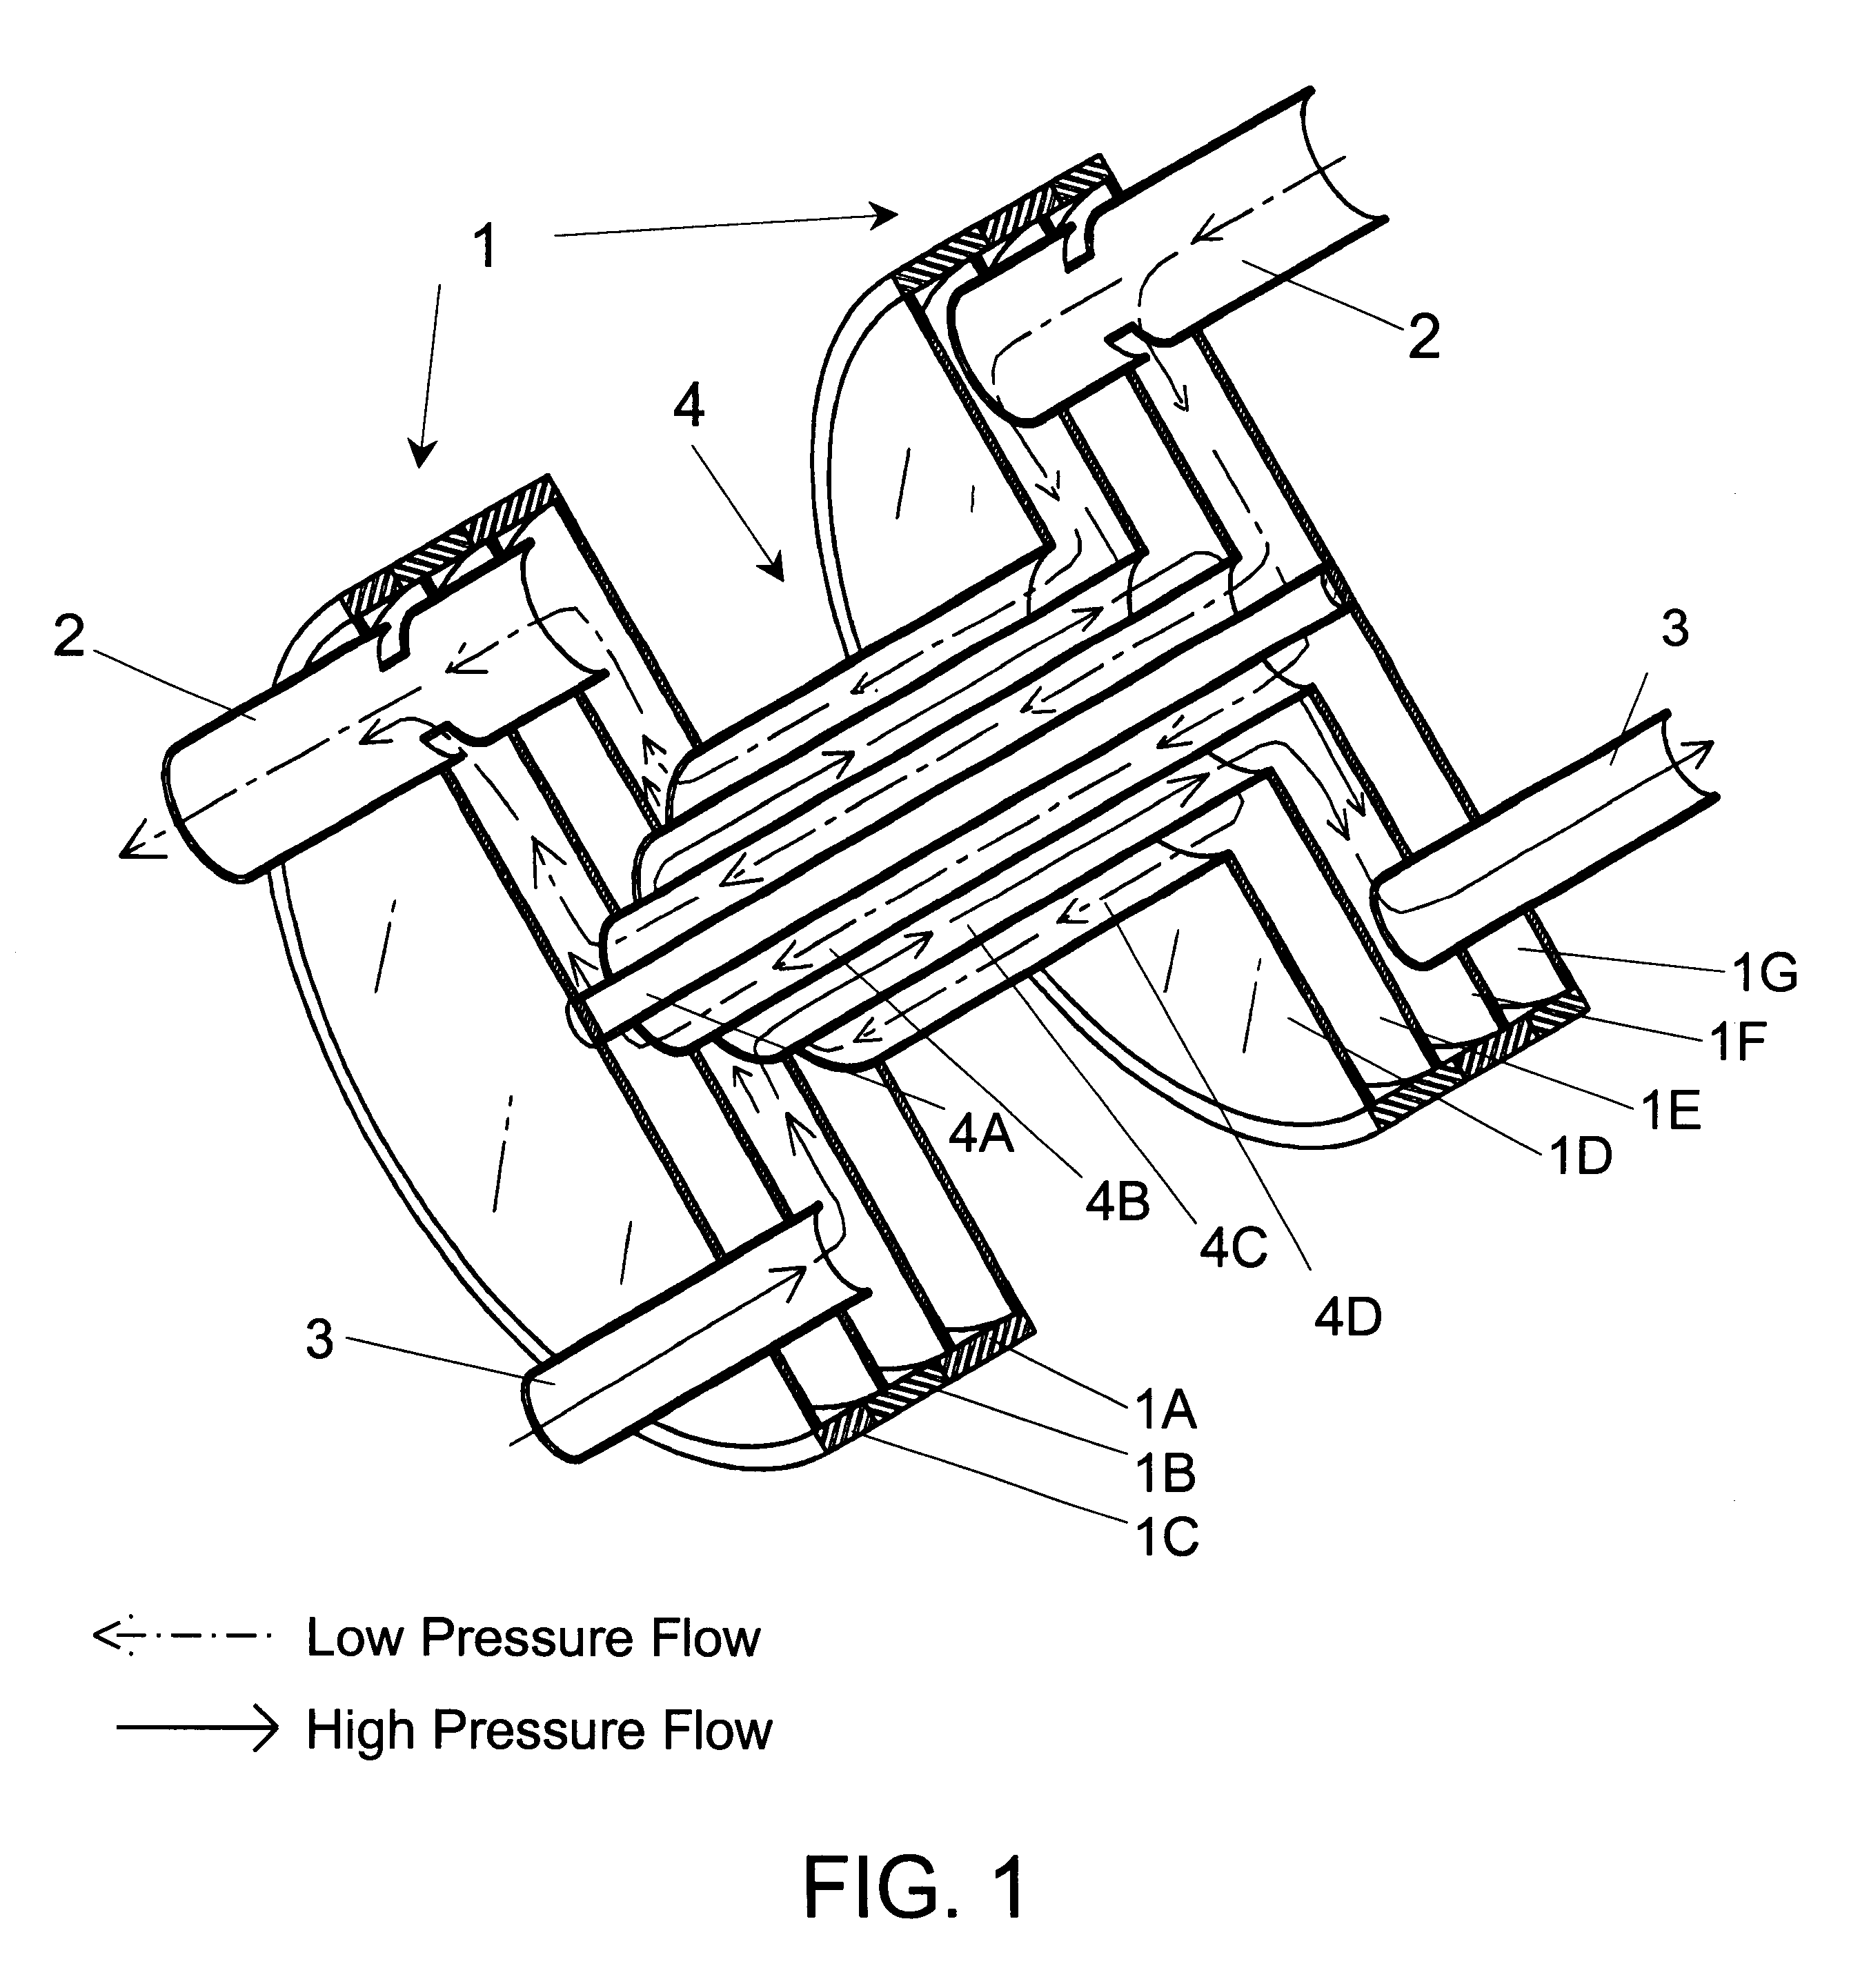 Annular flow concentric tube recuperator